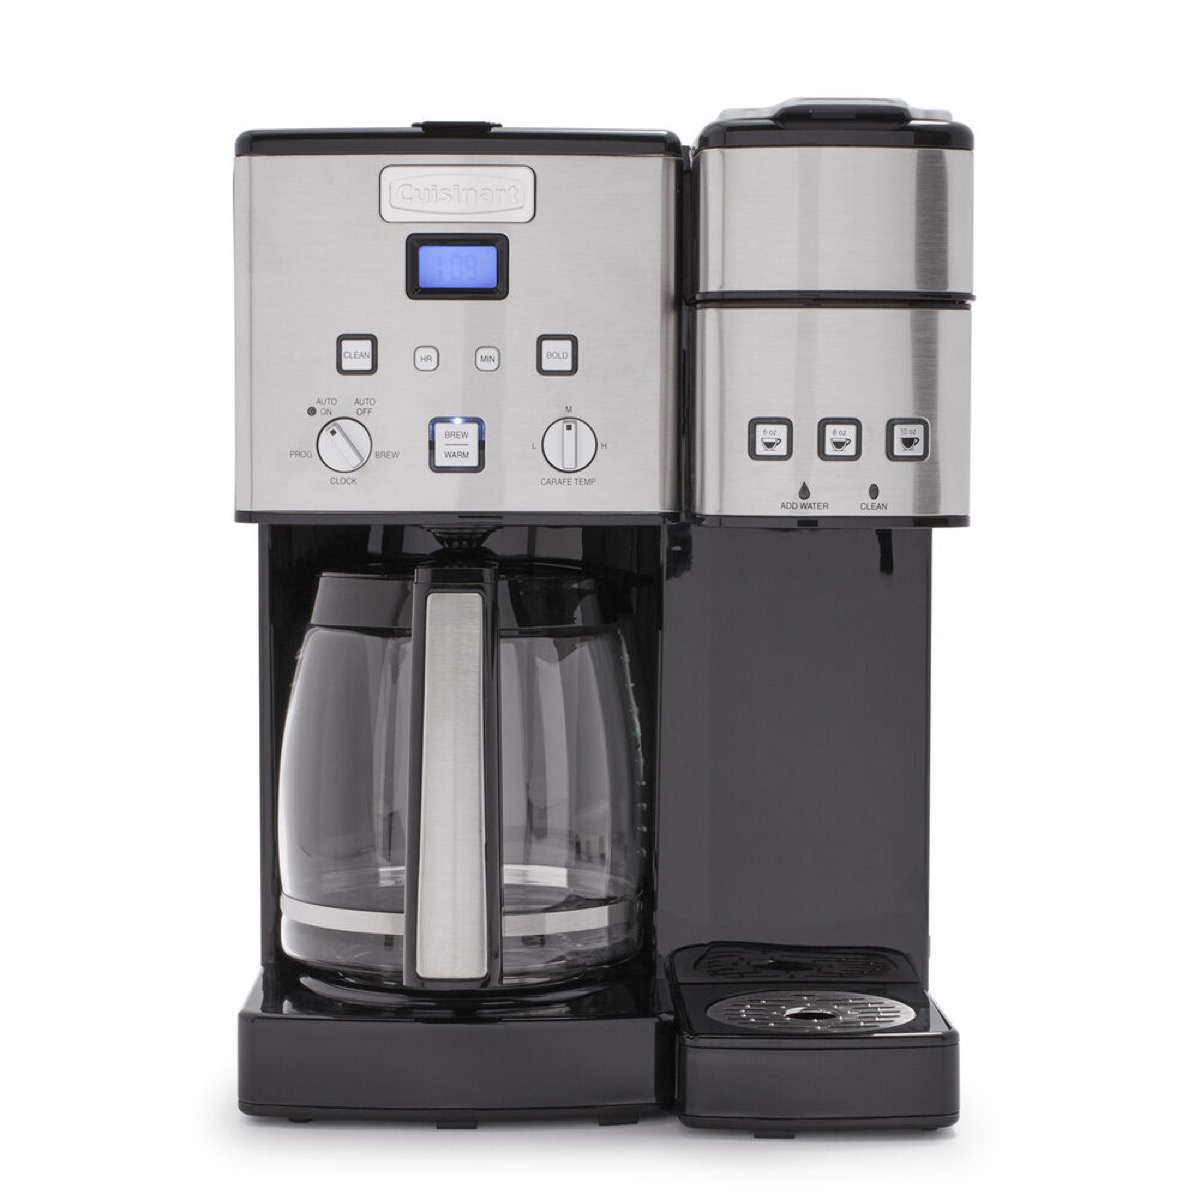 Cuisinart Coffee Center on white background